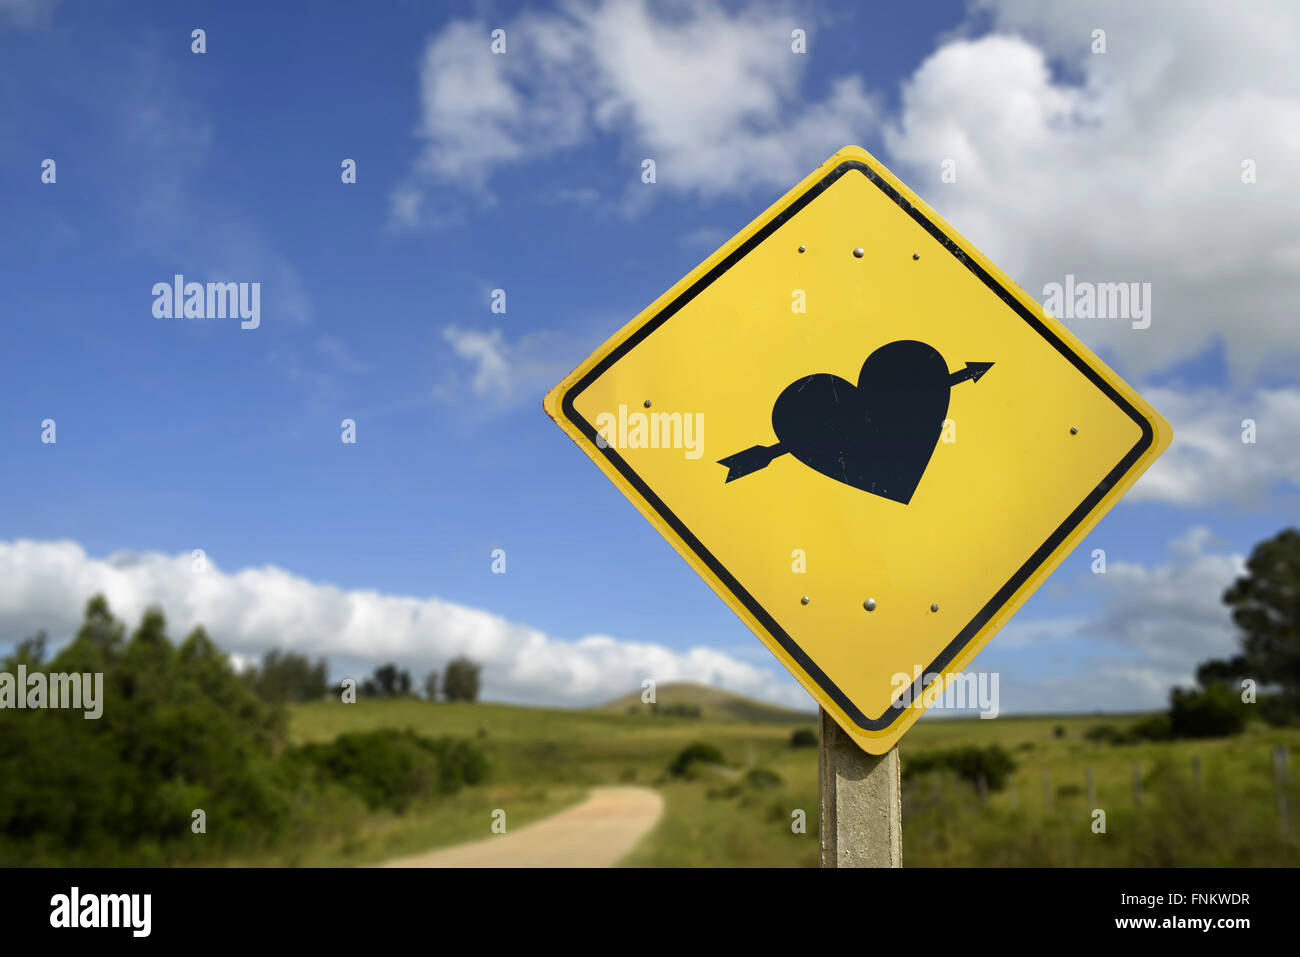 Find your soulmate this way, love journey concept. Road sign with heart shape and arrow icon in countryside landscape, includes Stock Photo